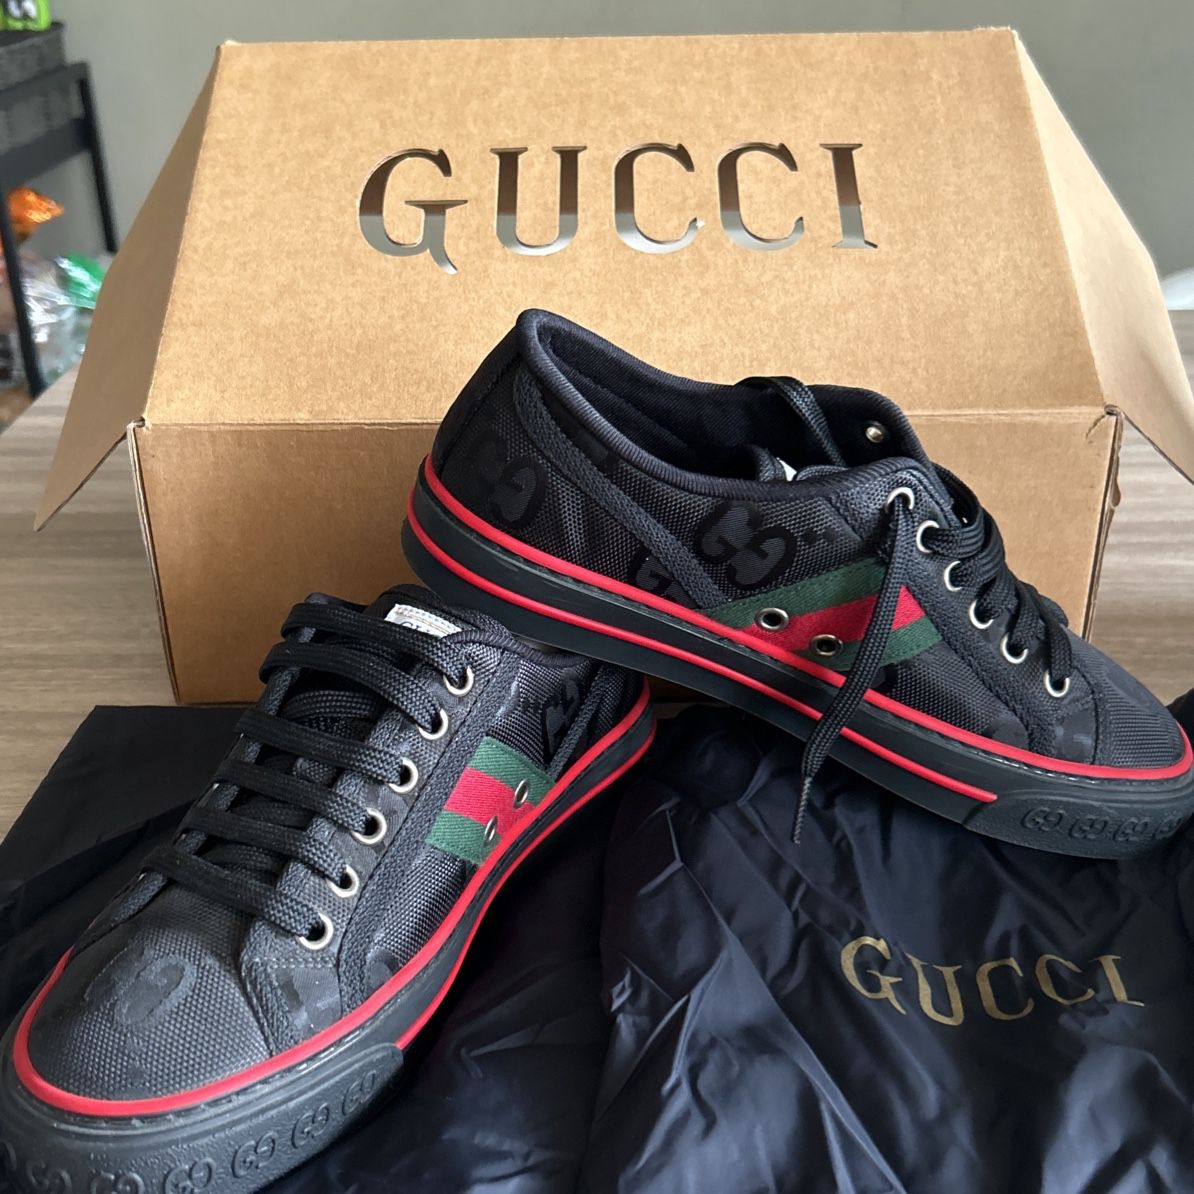 New Gucci Shoes